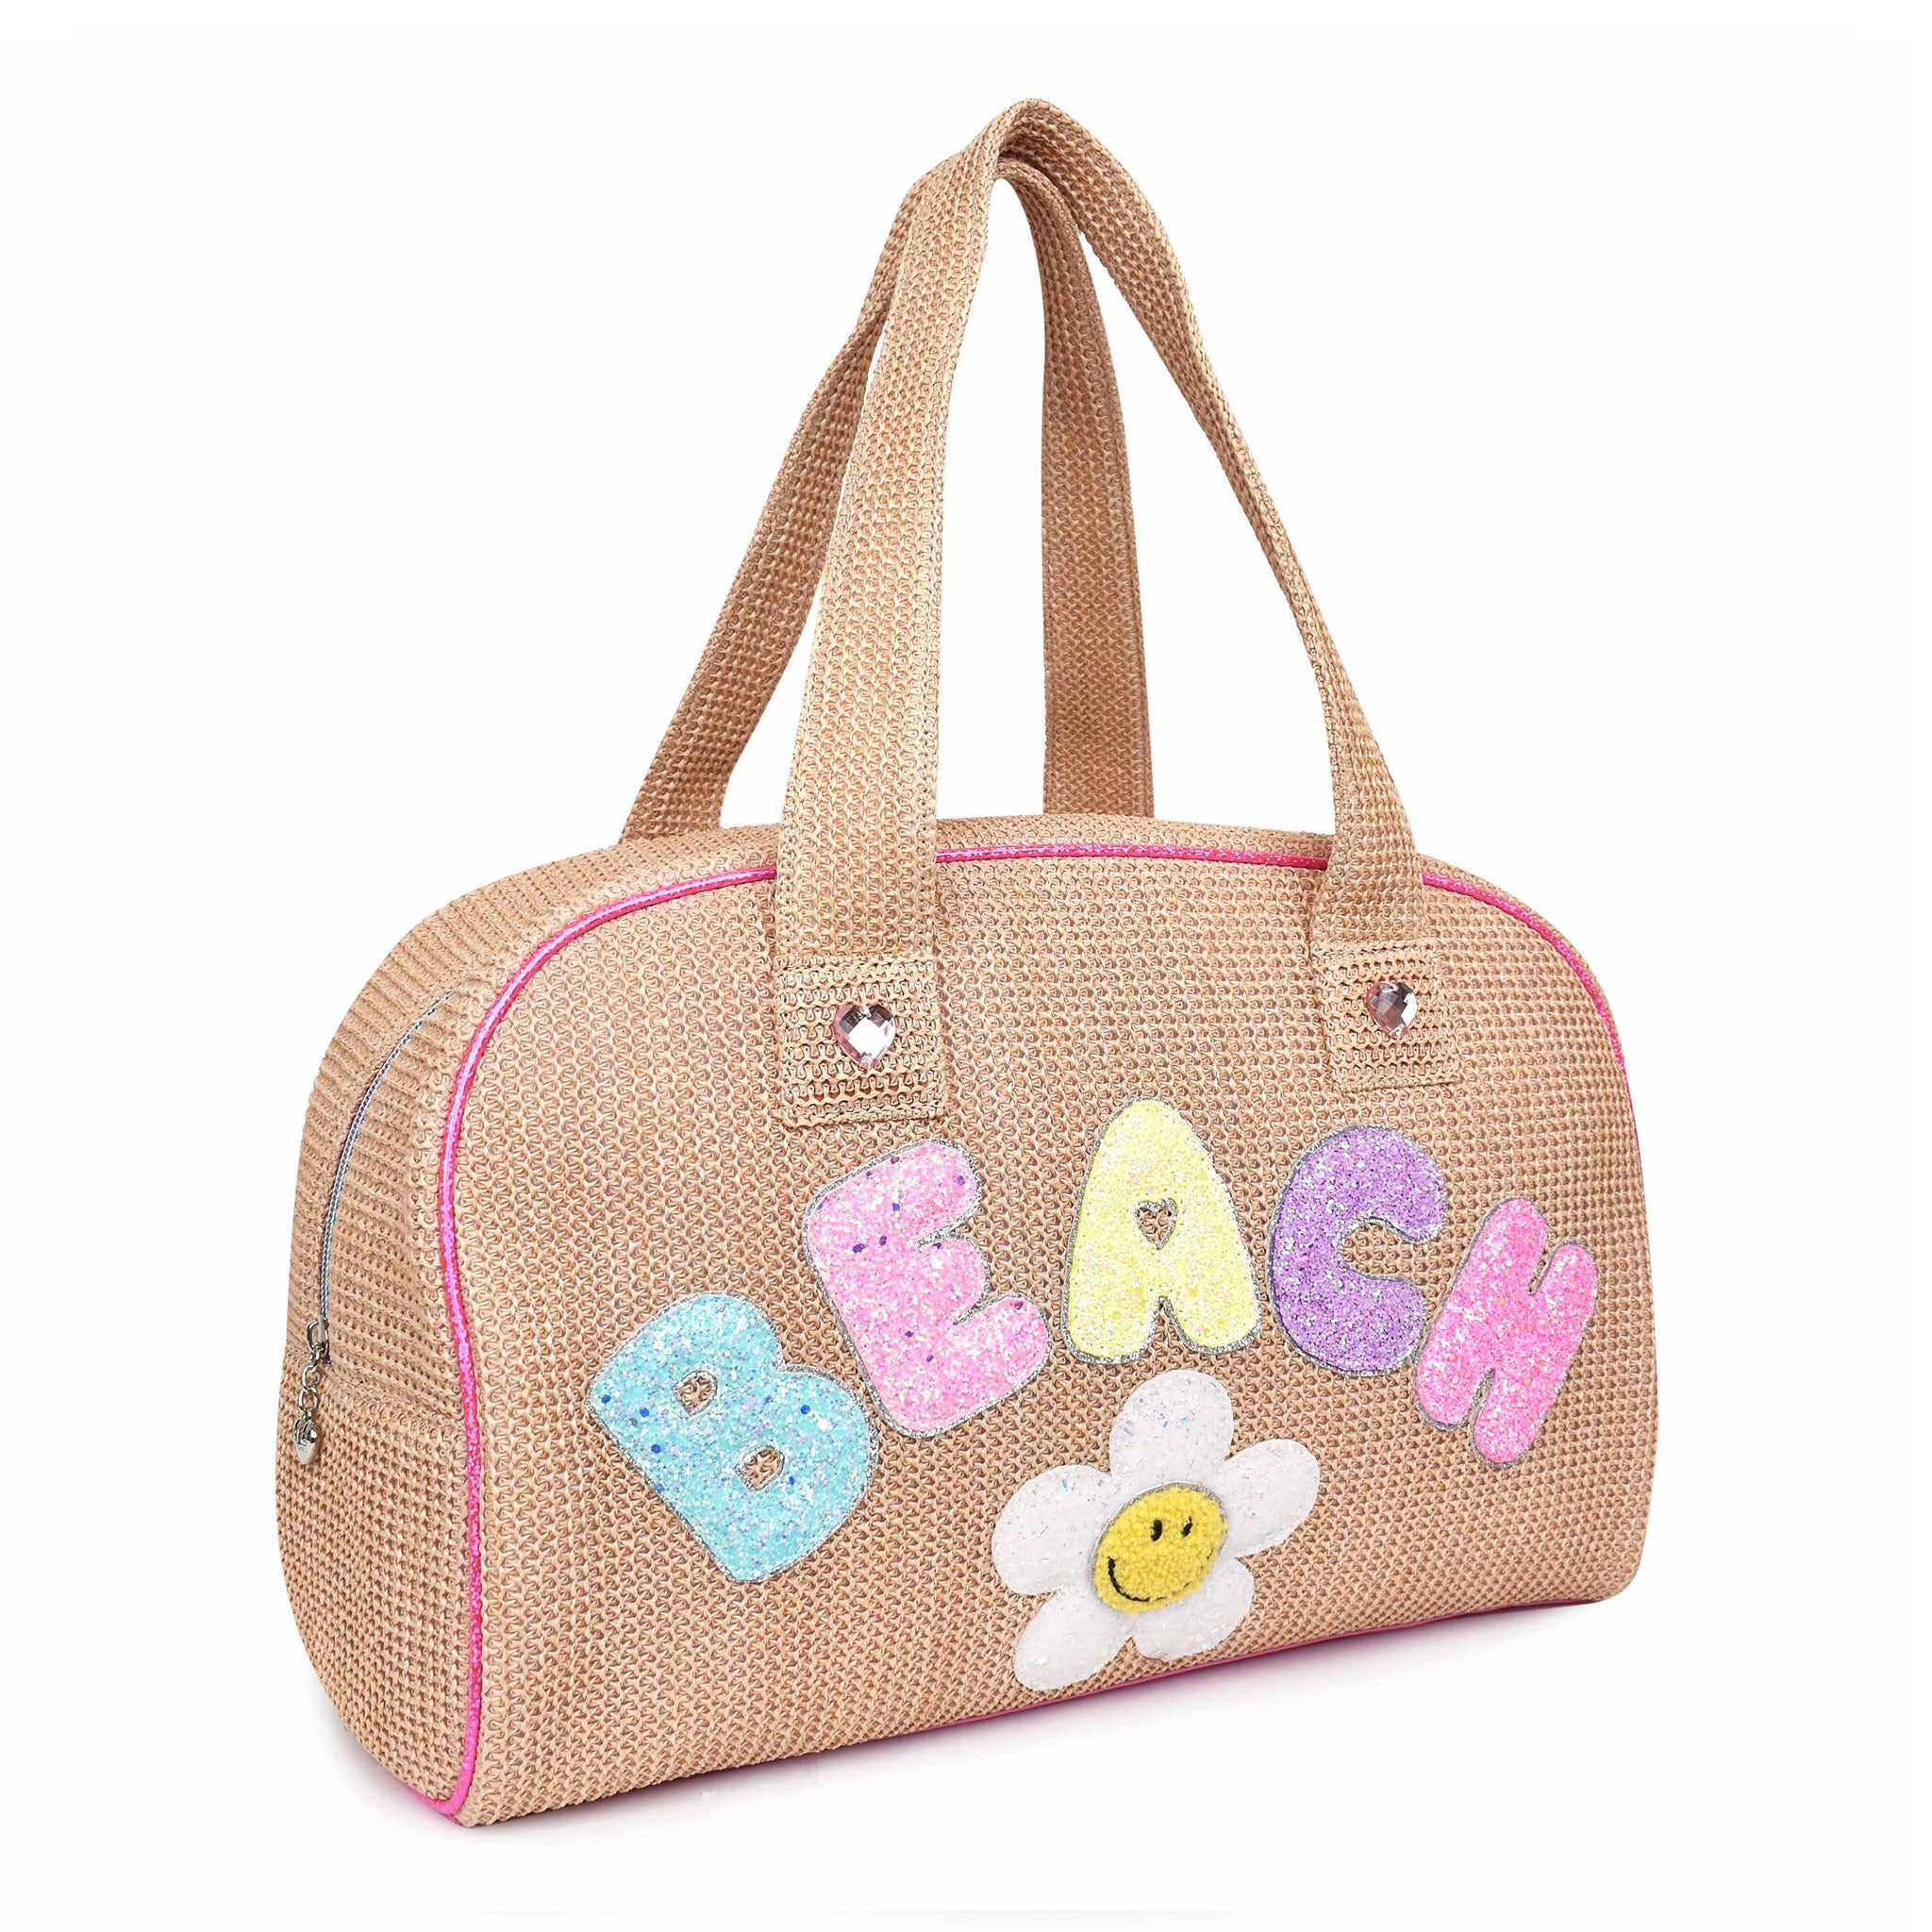 Side view of a straw medium duffle bag embellished with glitter bubble letters 'BEACH' and smiley face daisy appliqués